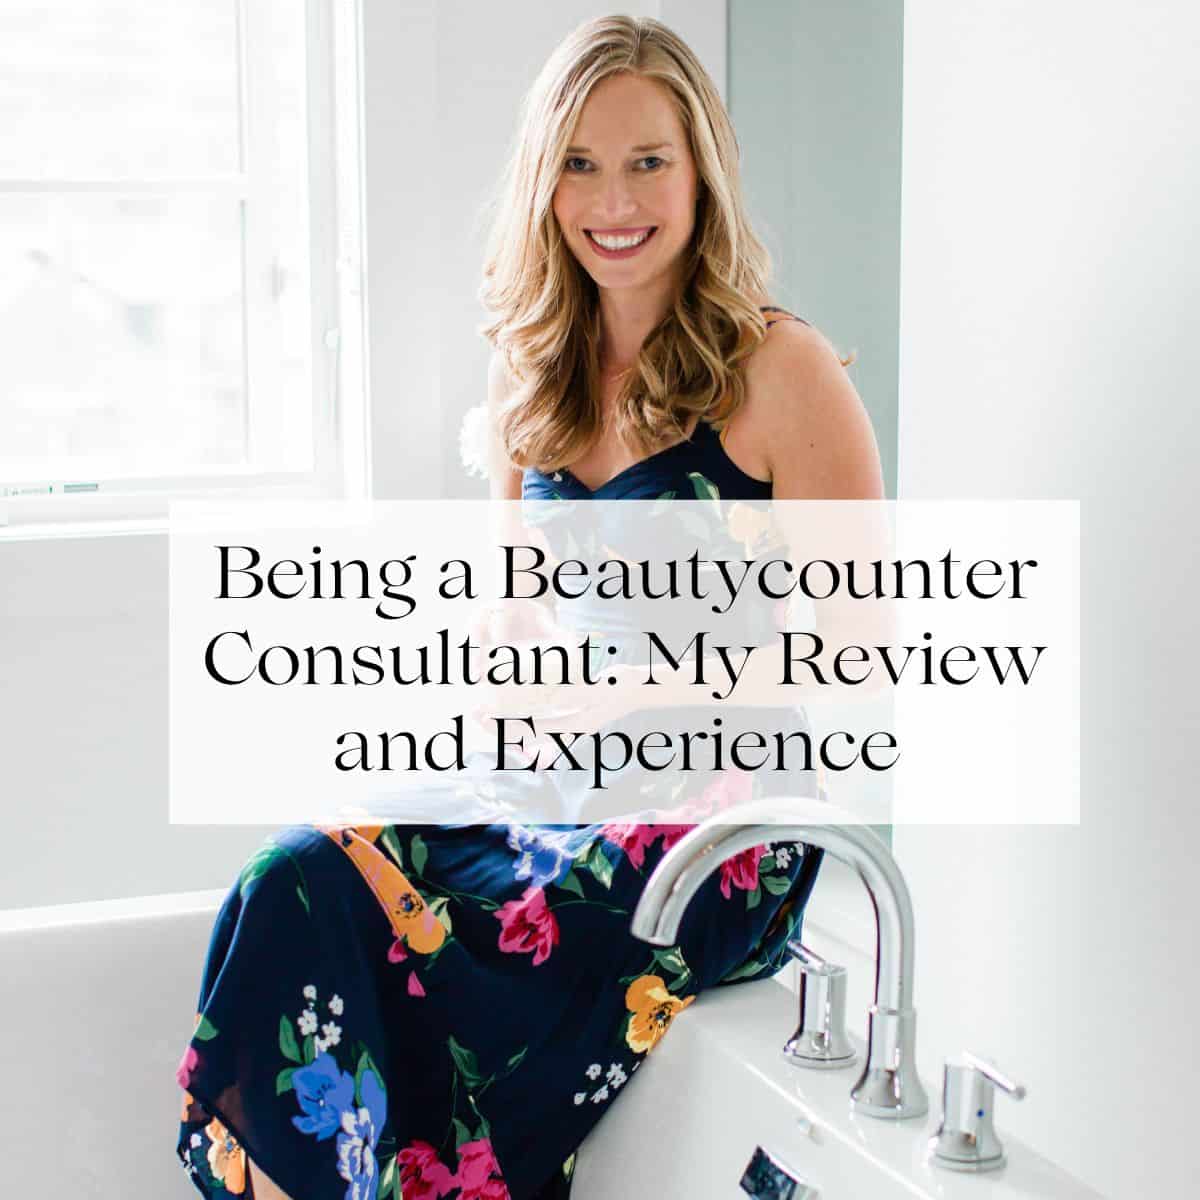 Erin Carter sitting on the edge of a bathtub wearing a floral dress with the title "being a Beautycounter consultant: my review and experience" above her.